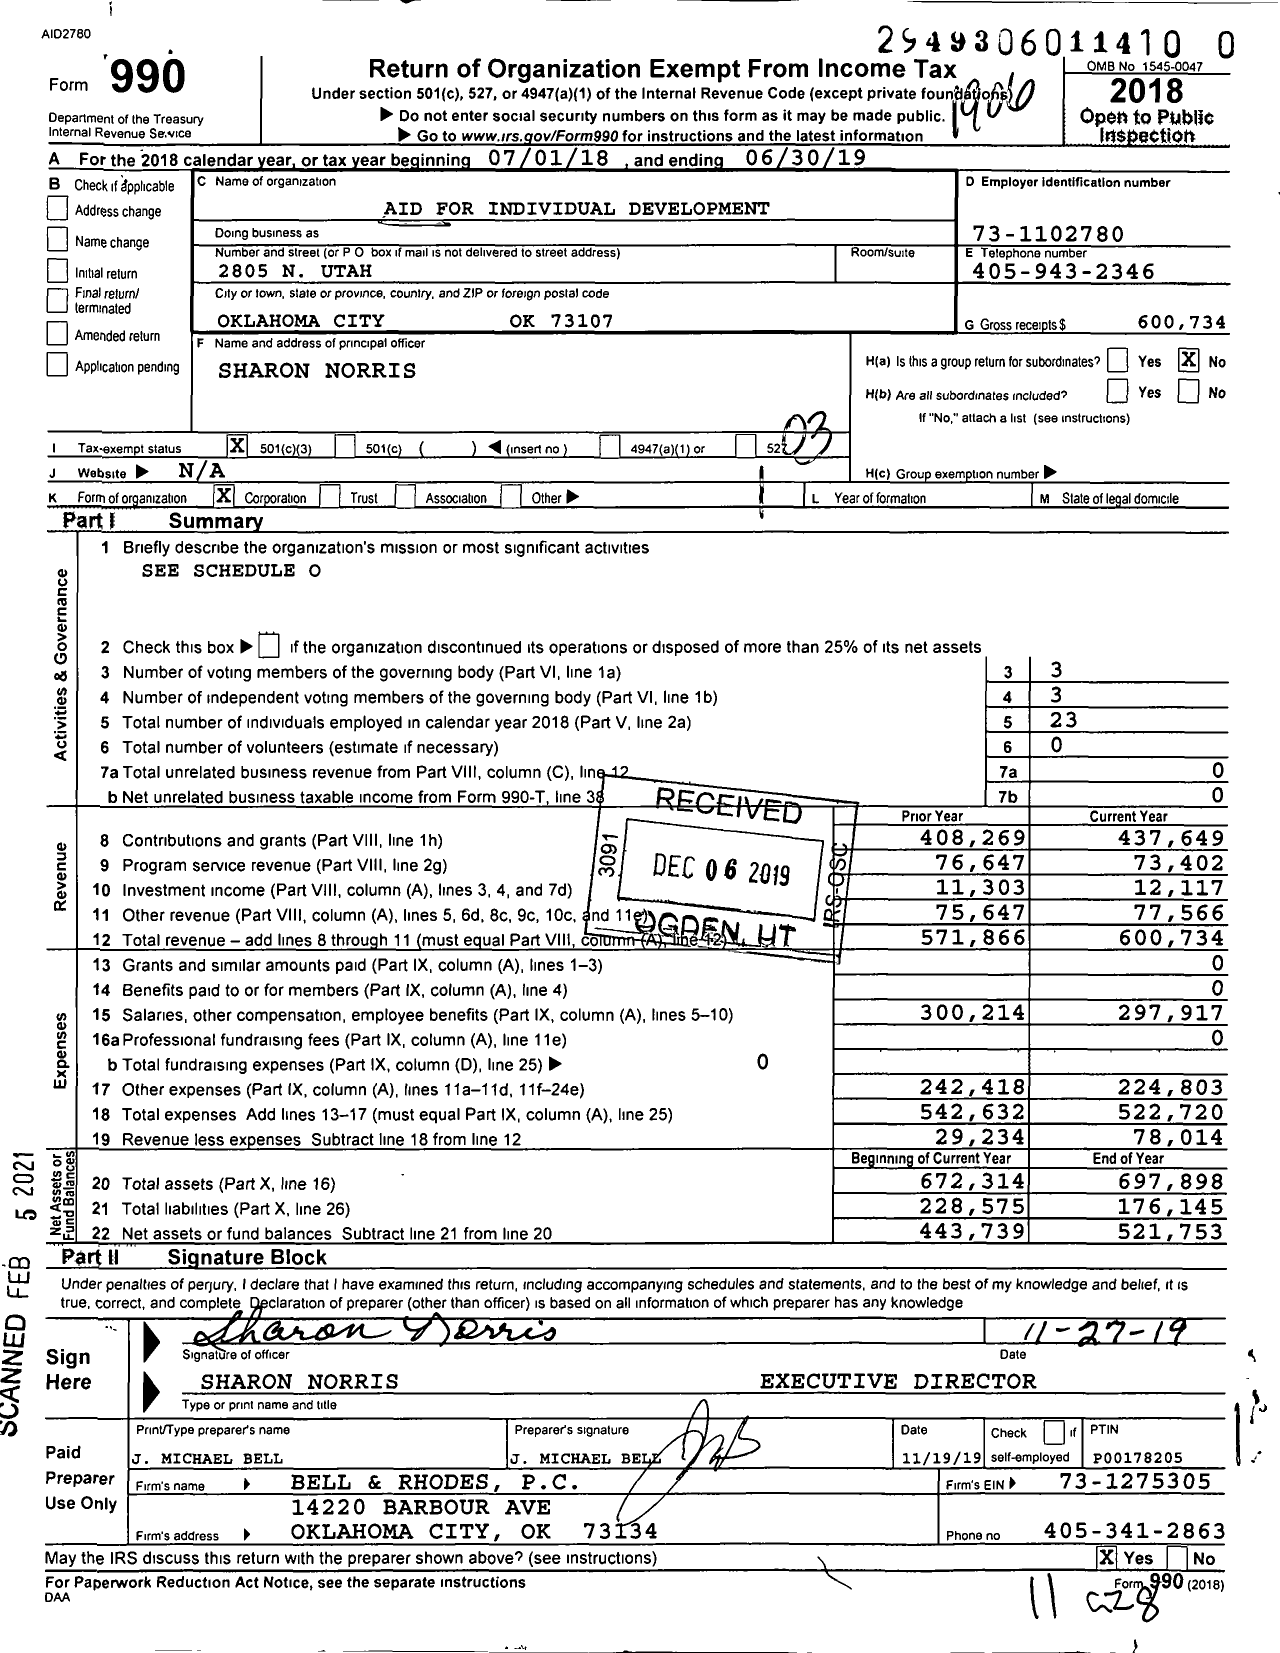 Image of first page of 2018 Form 990 for Aid for Individual Development